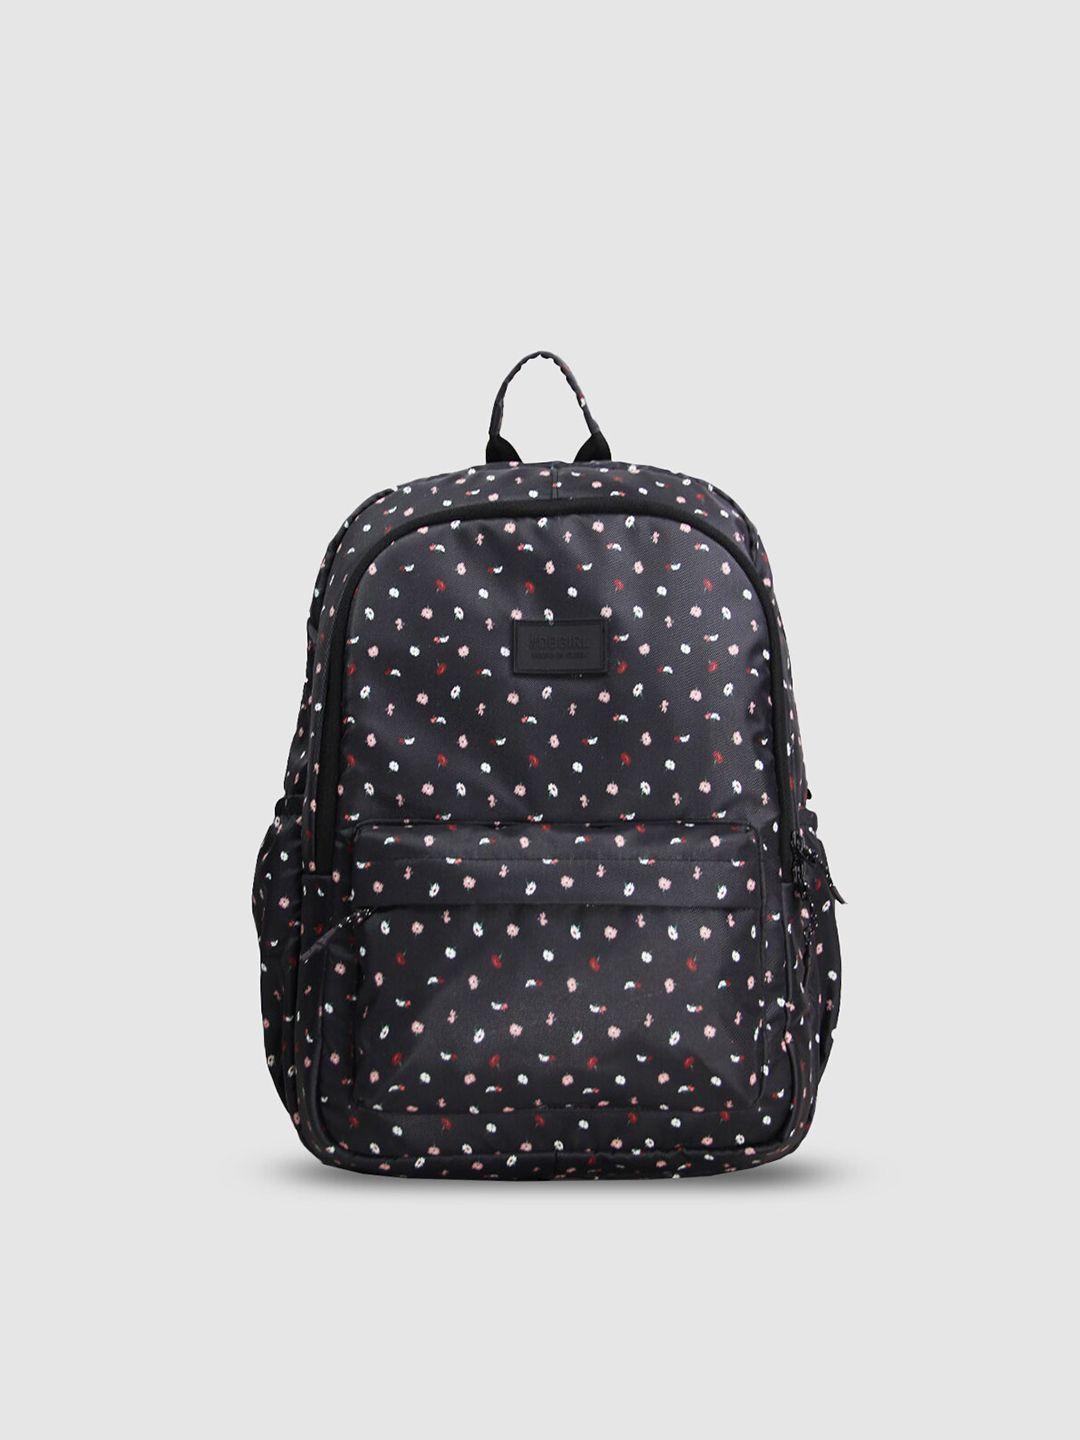 dressberry women black & white floral printed backpack